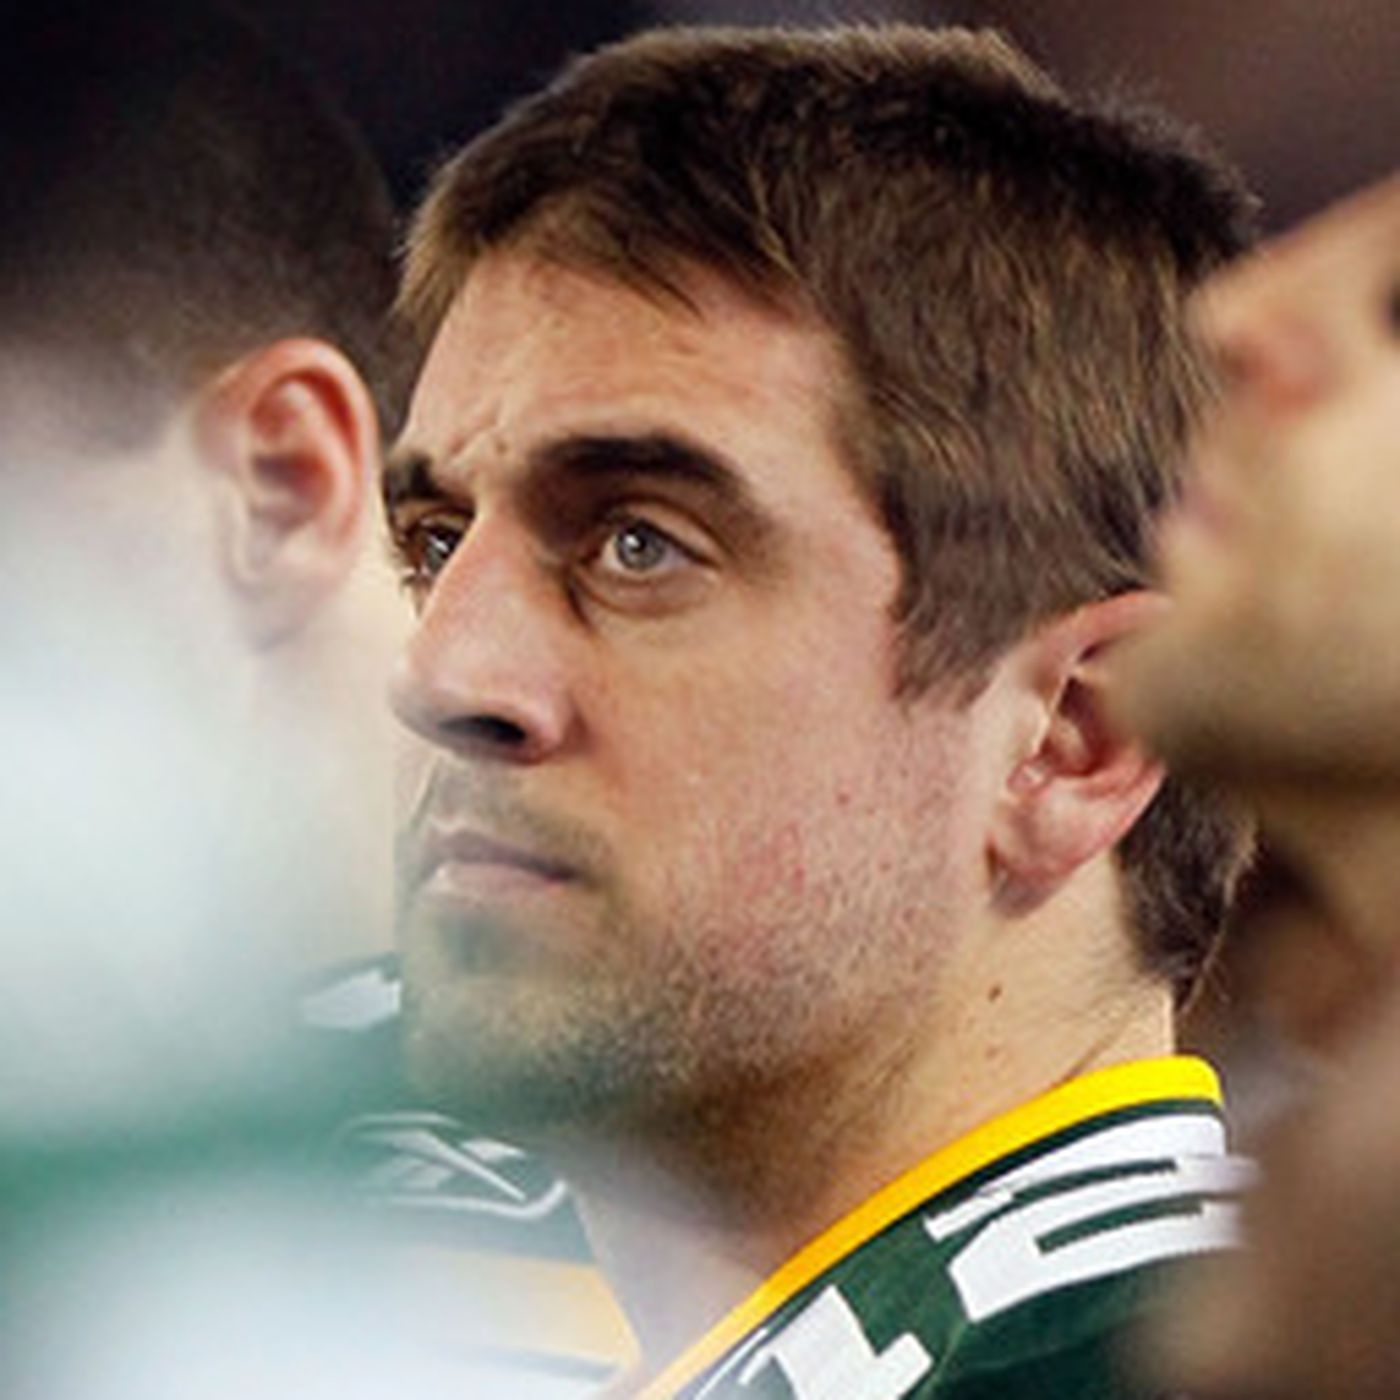 Is Aaron Rodgers gay? When speculation becomes problematic. - Outsports